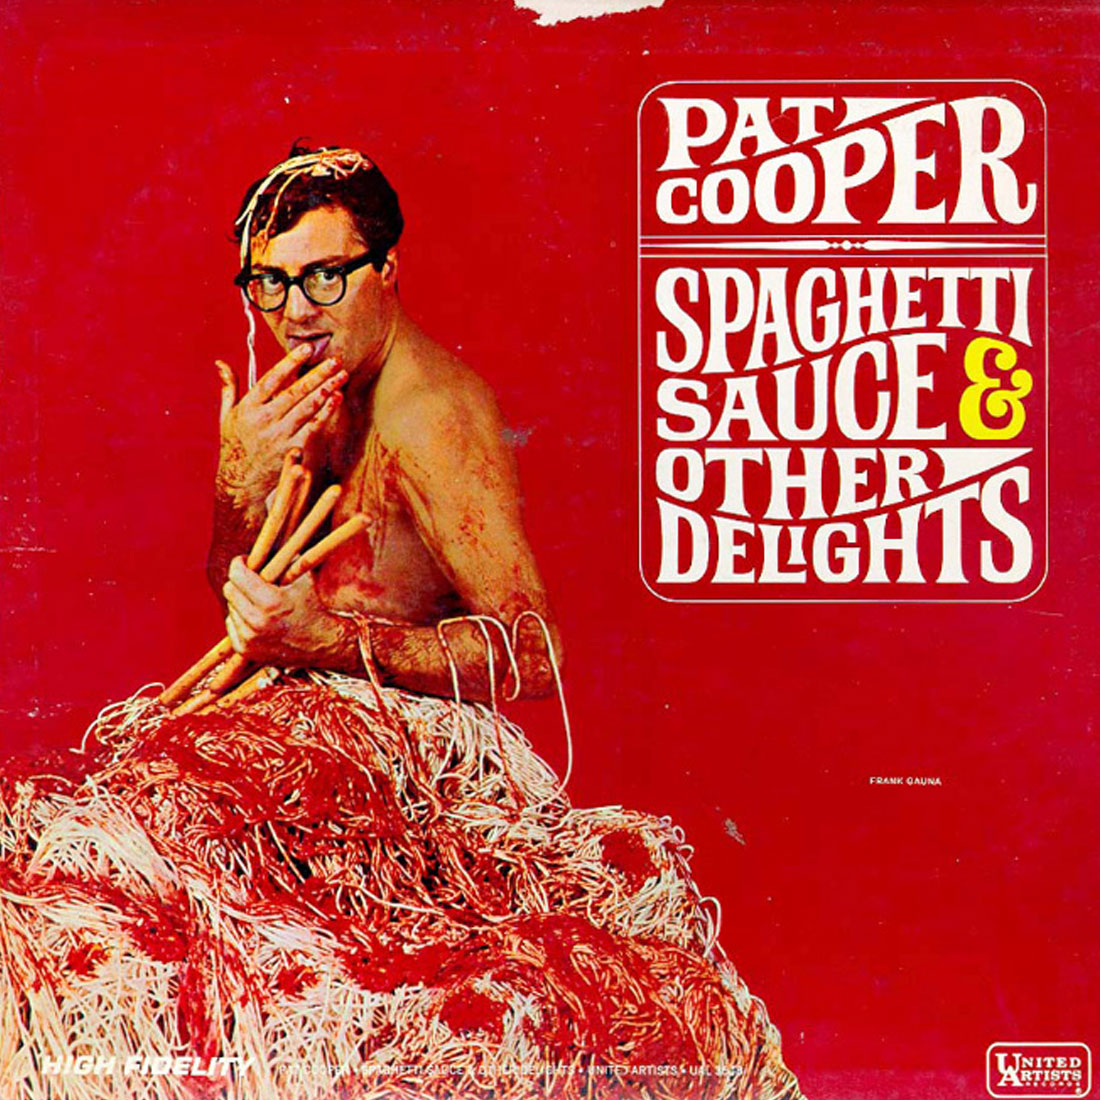 Album cover "Spaghetti Sauce & Other Delights" by Patrick Cooper